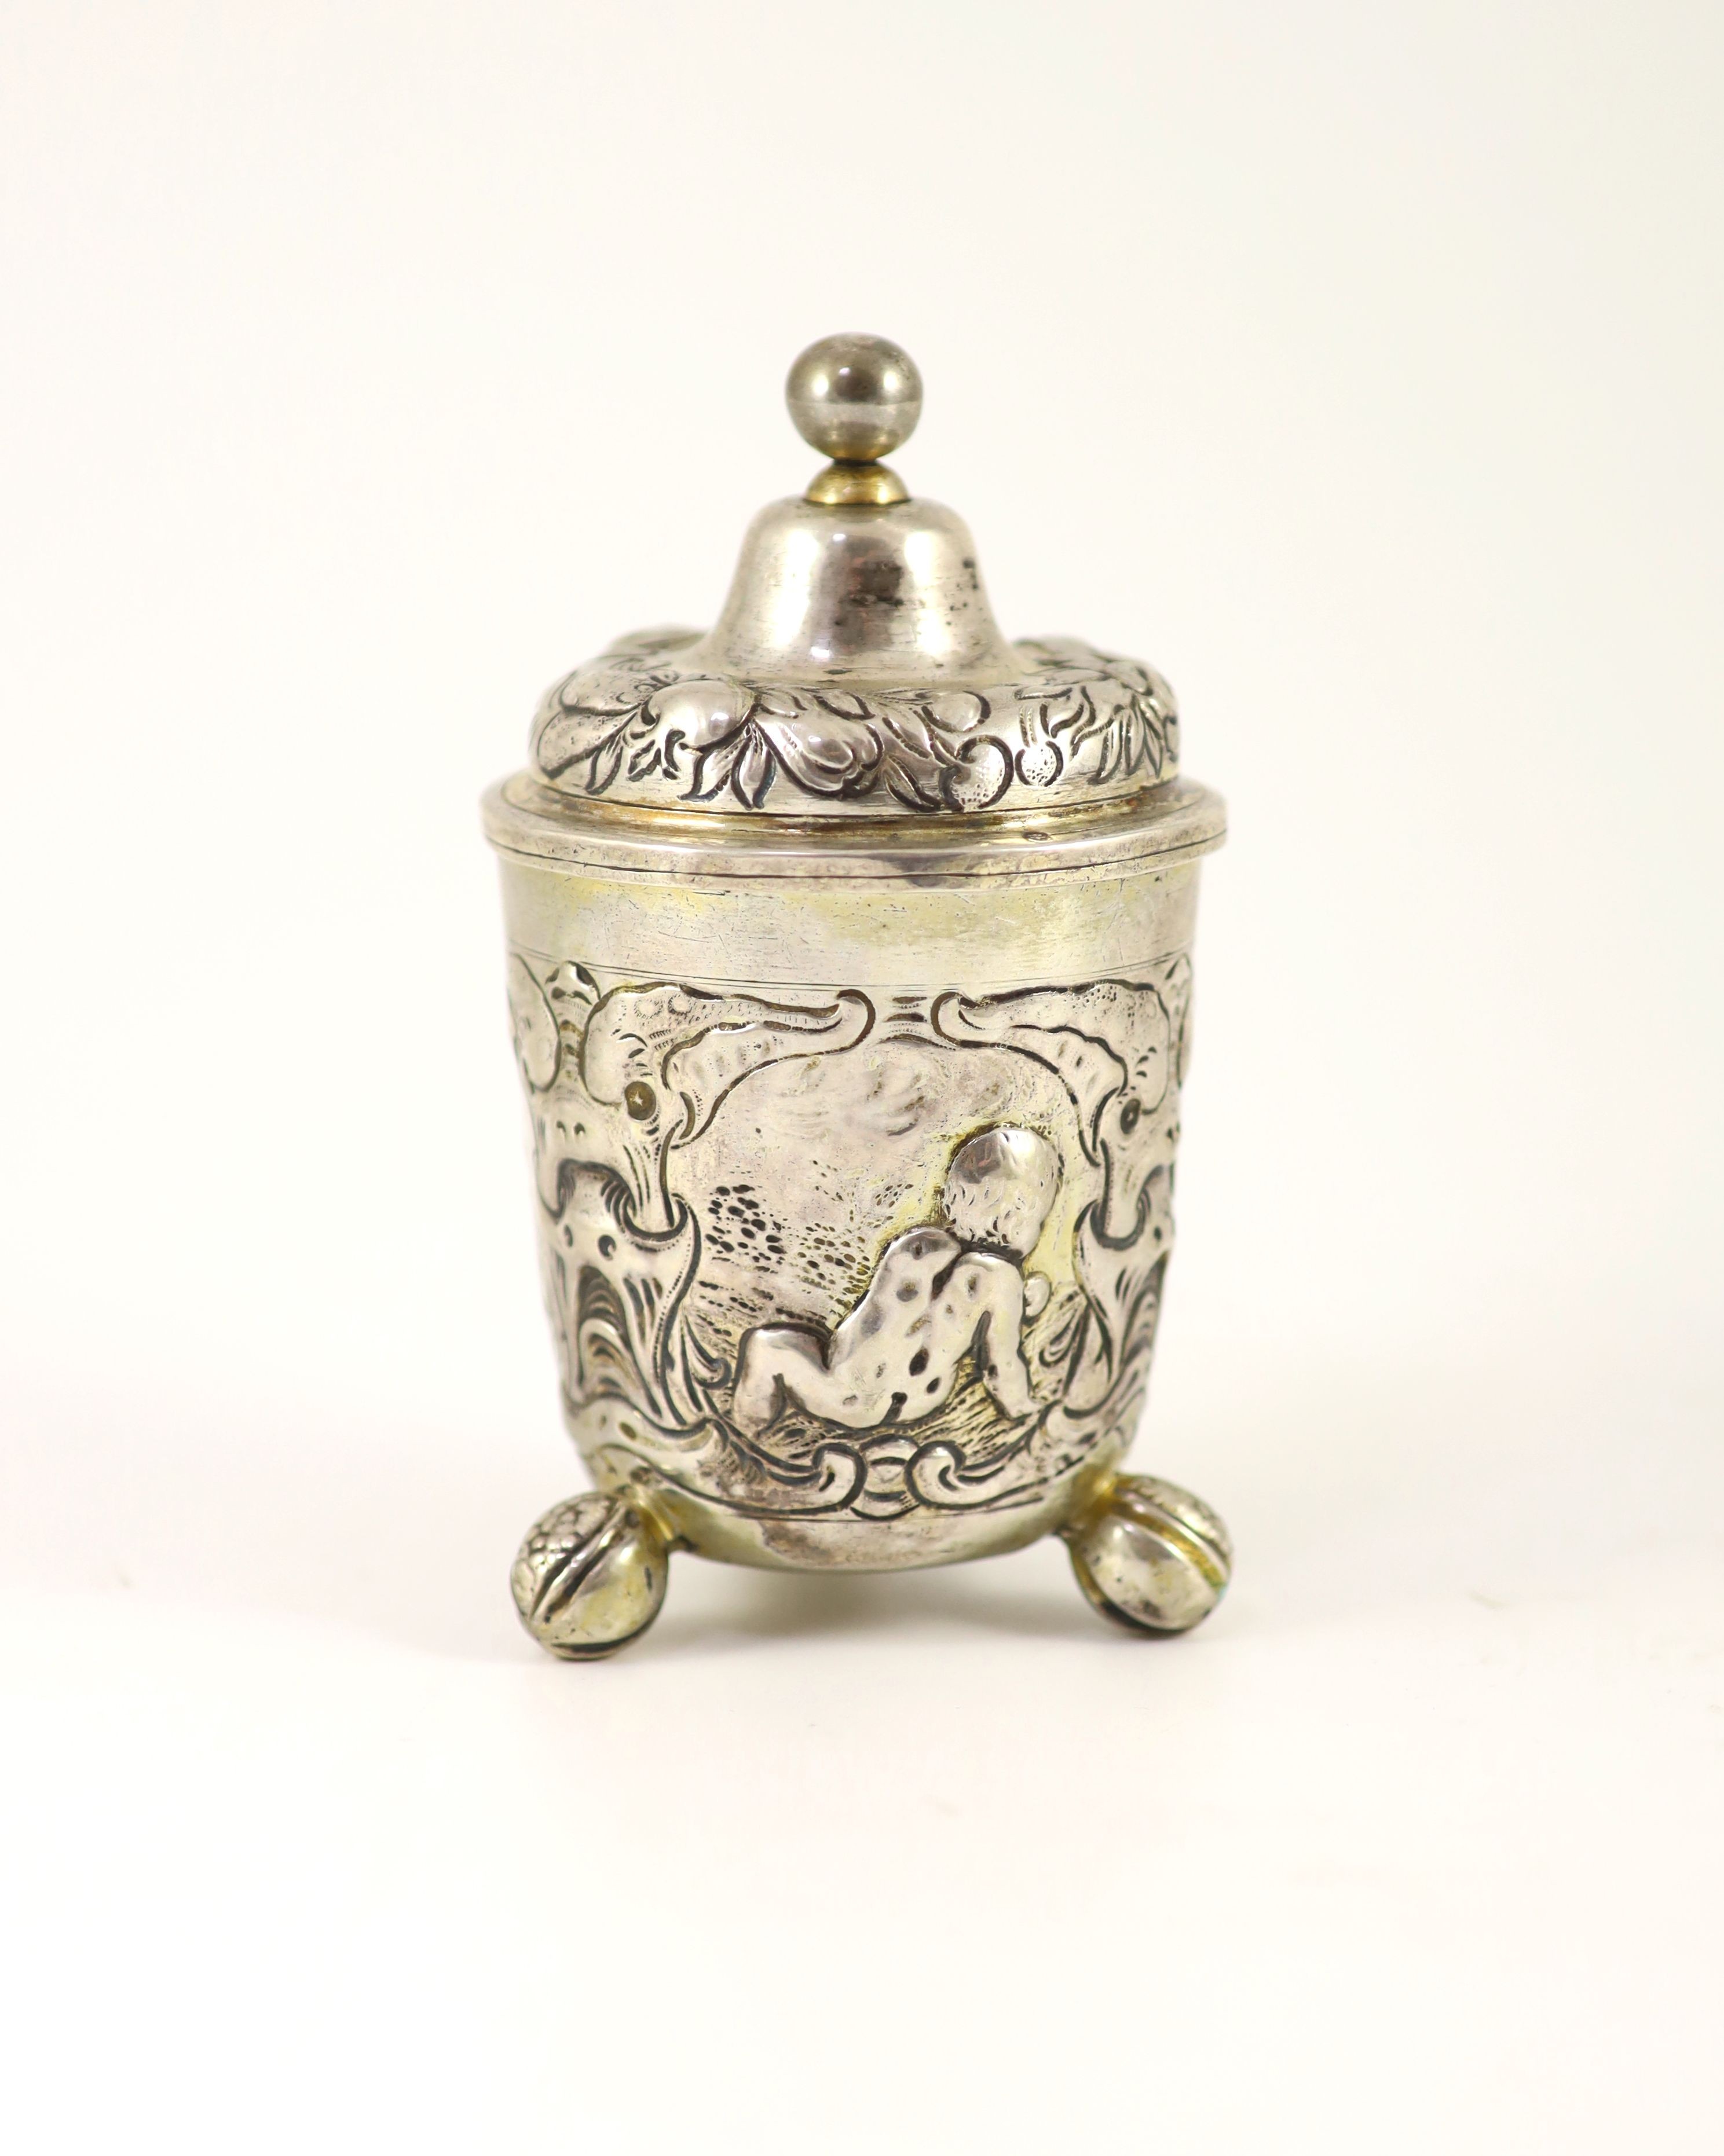 An 18th century possibly German silver cup and cover